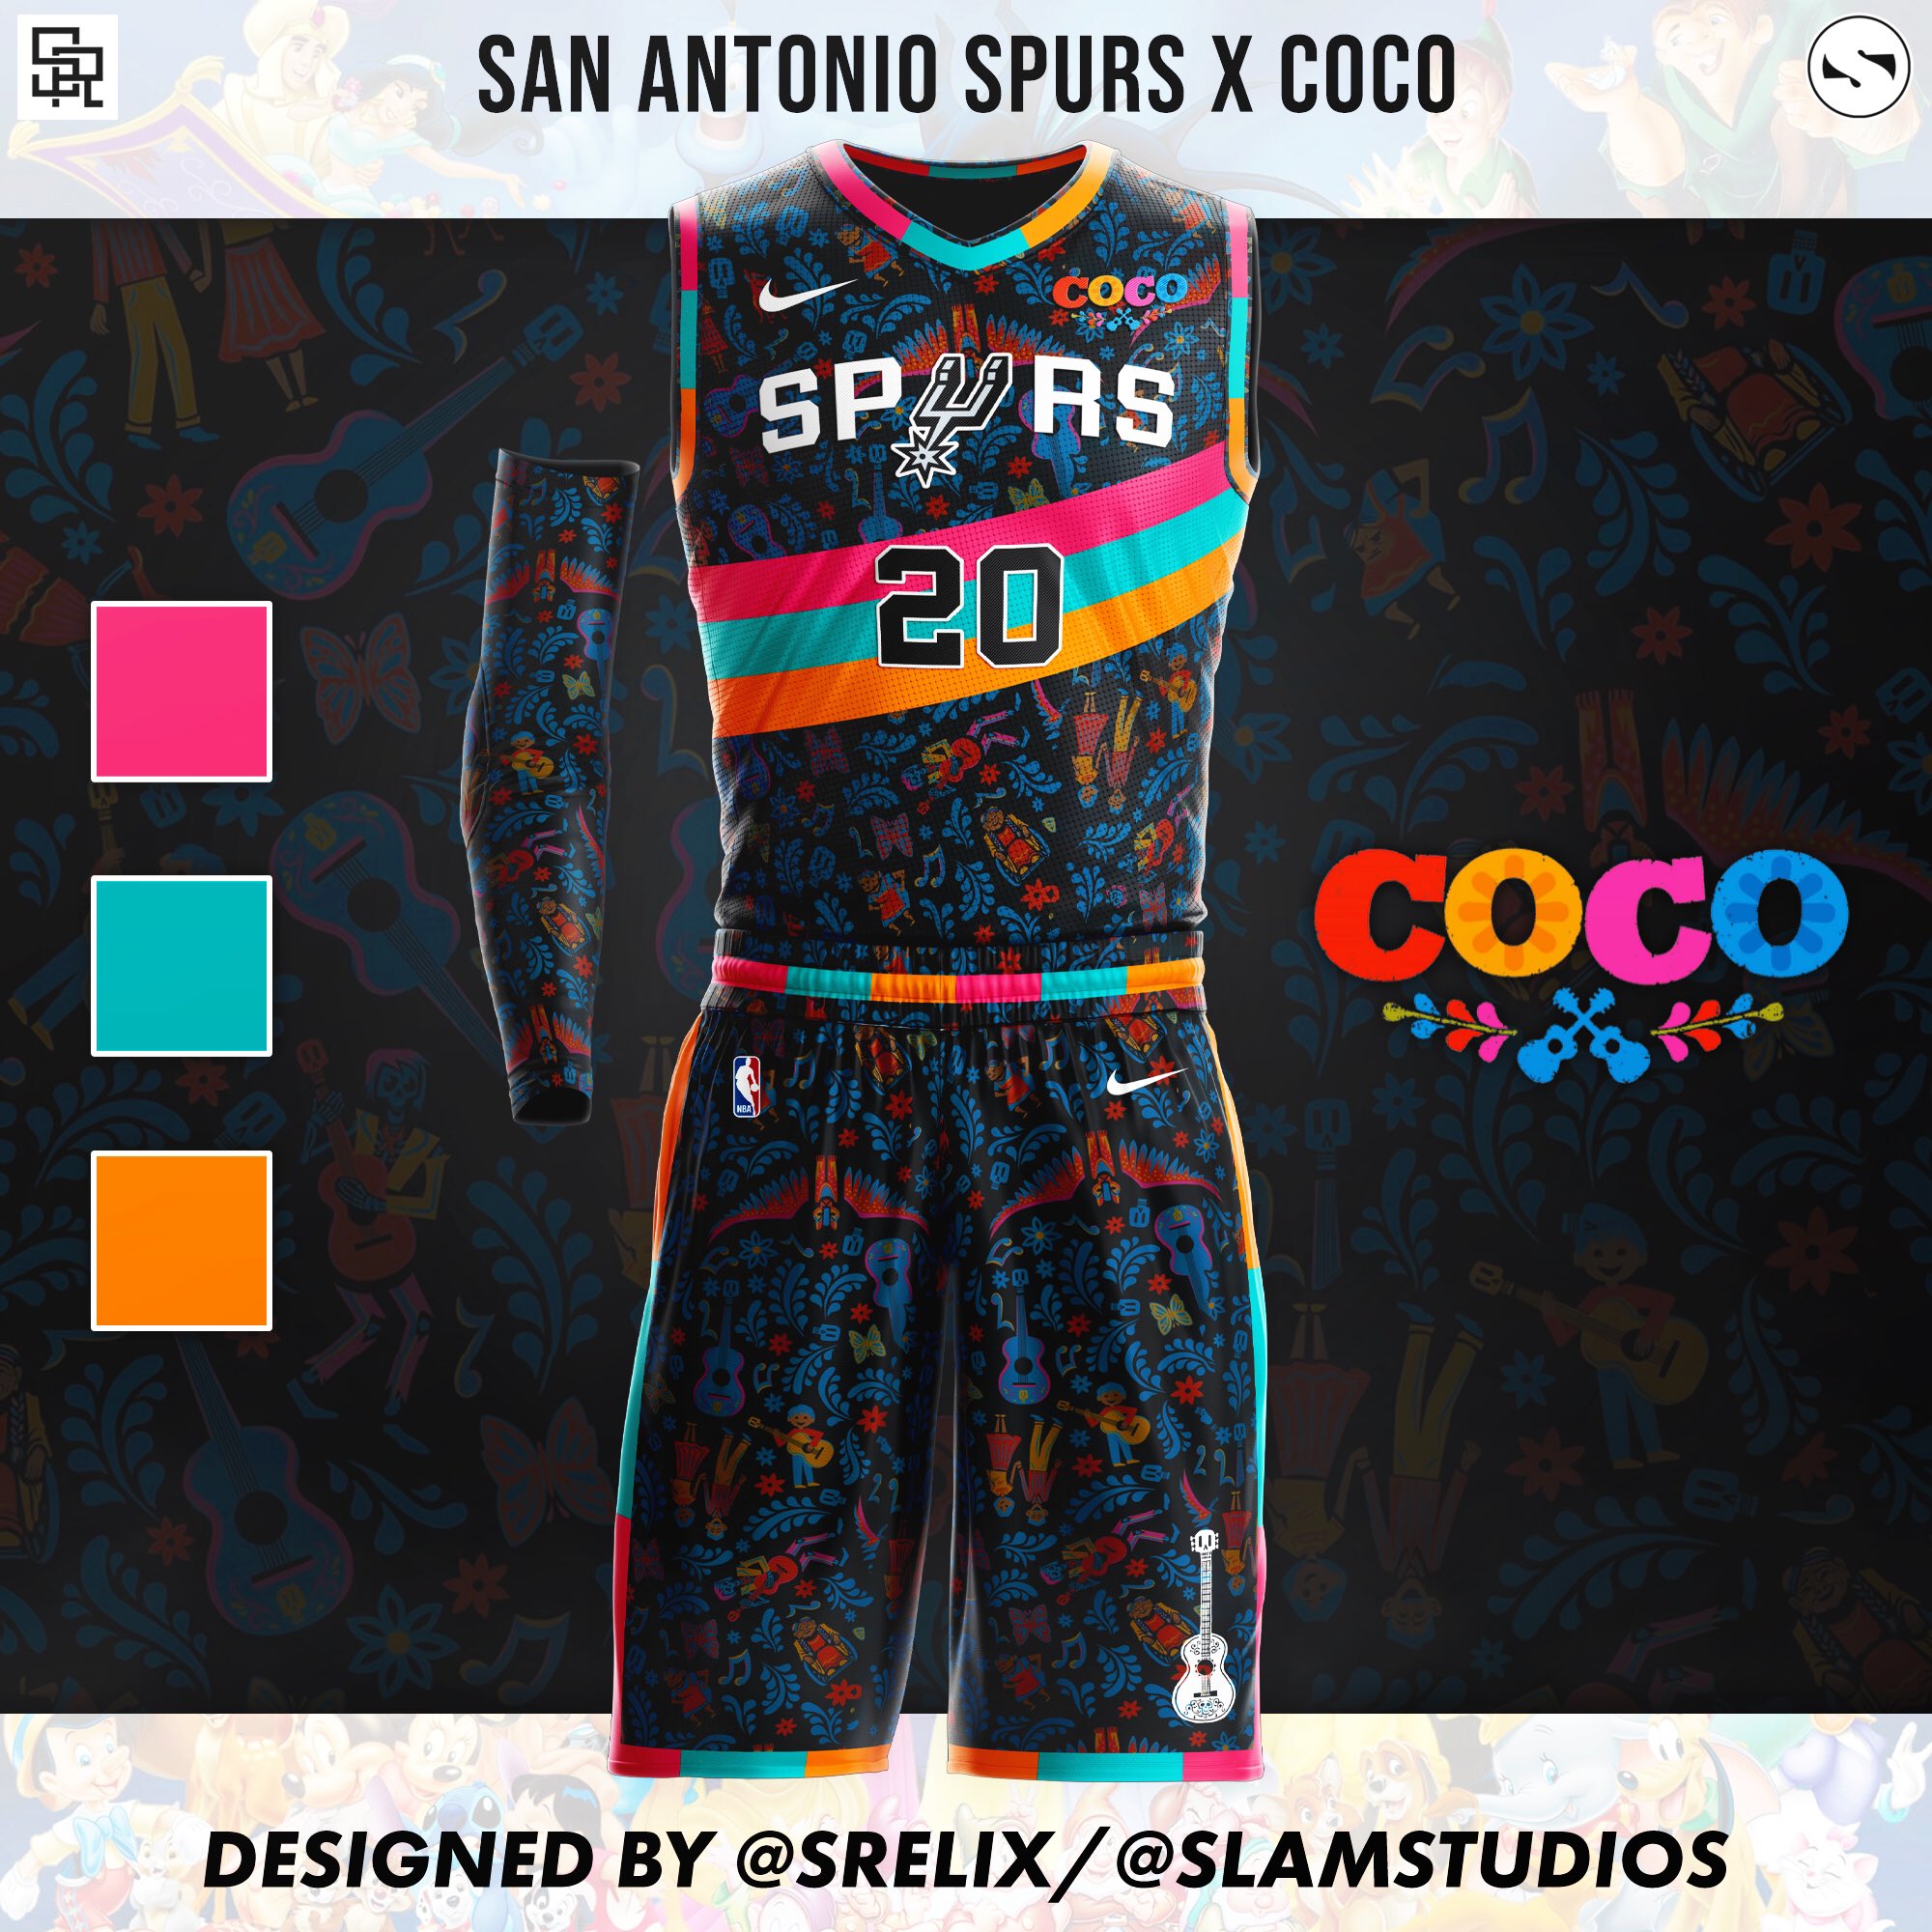 Spurs release dates for Fiesta-themed uniforms